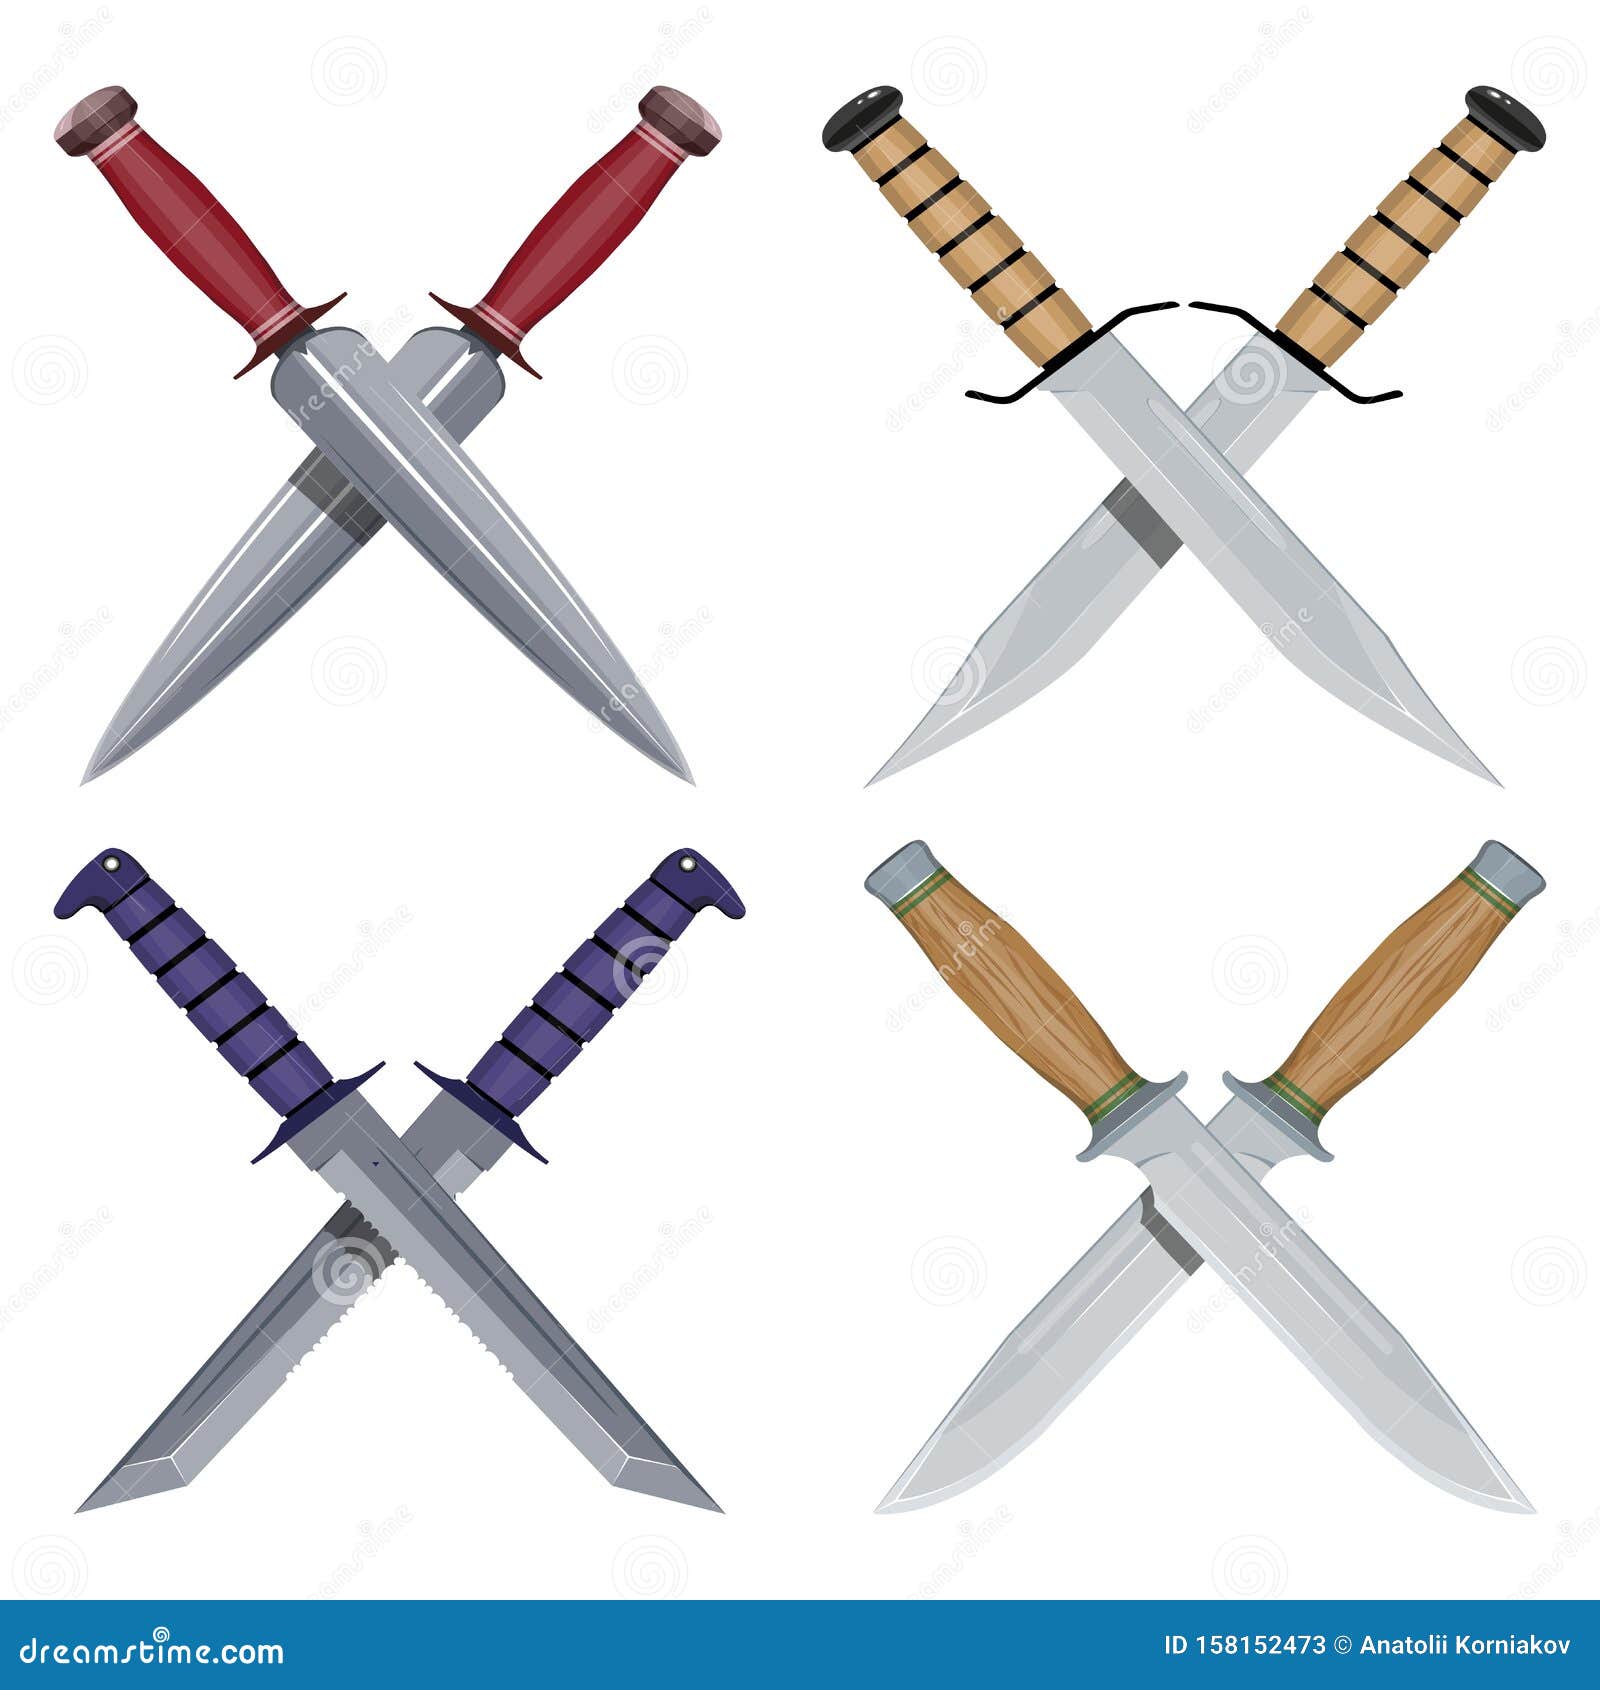 crossed combat knives